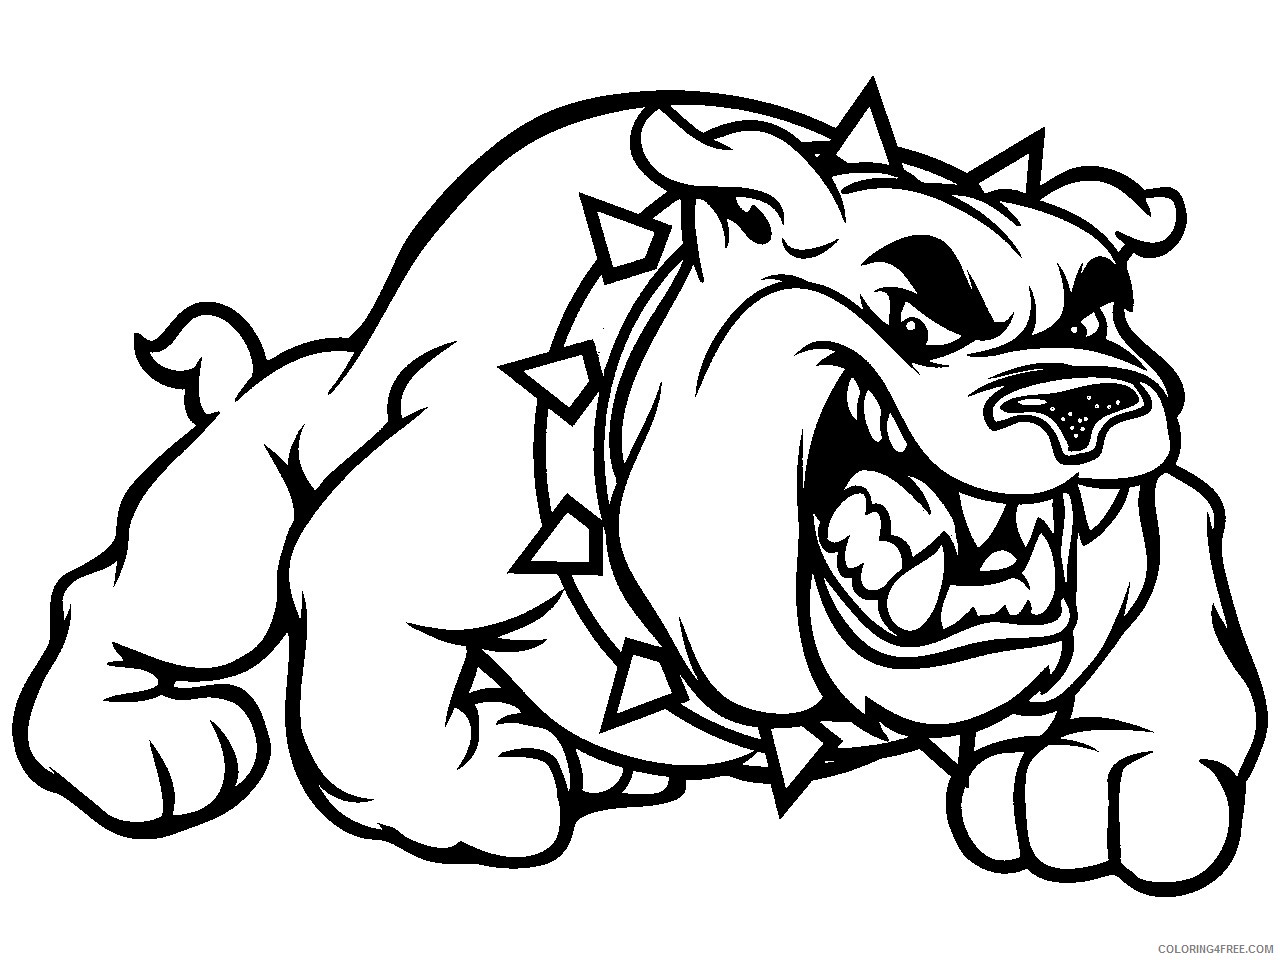 Black And White Bulldog Coloring Pages Disegni Bulldog Disegni Da Colorare Printable Coloring4free Coloring4free Com - brawl stars disegni da colorare gene yoda